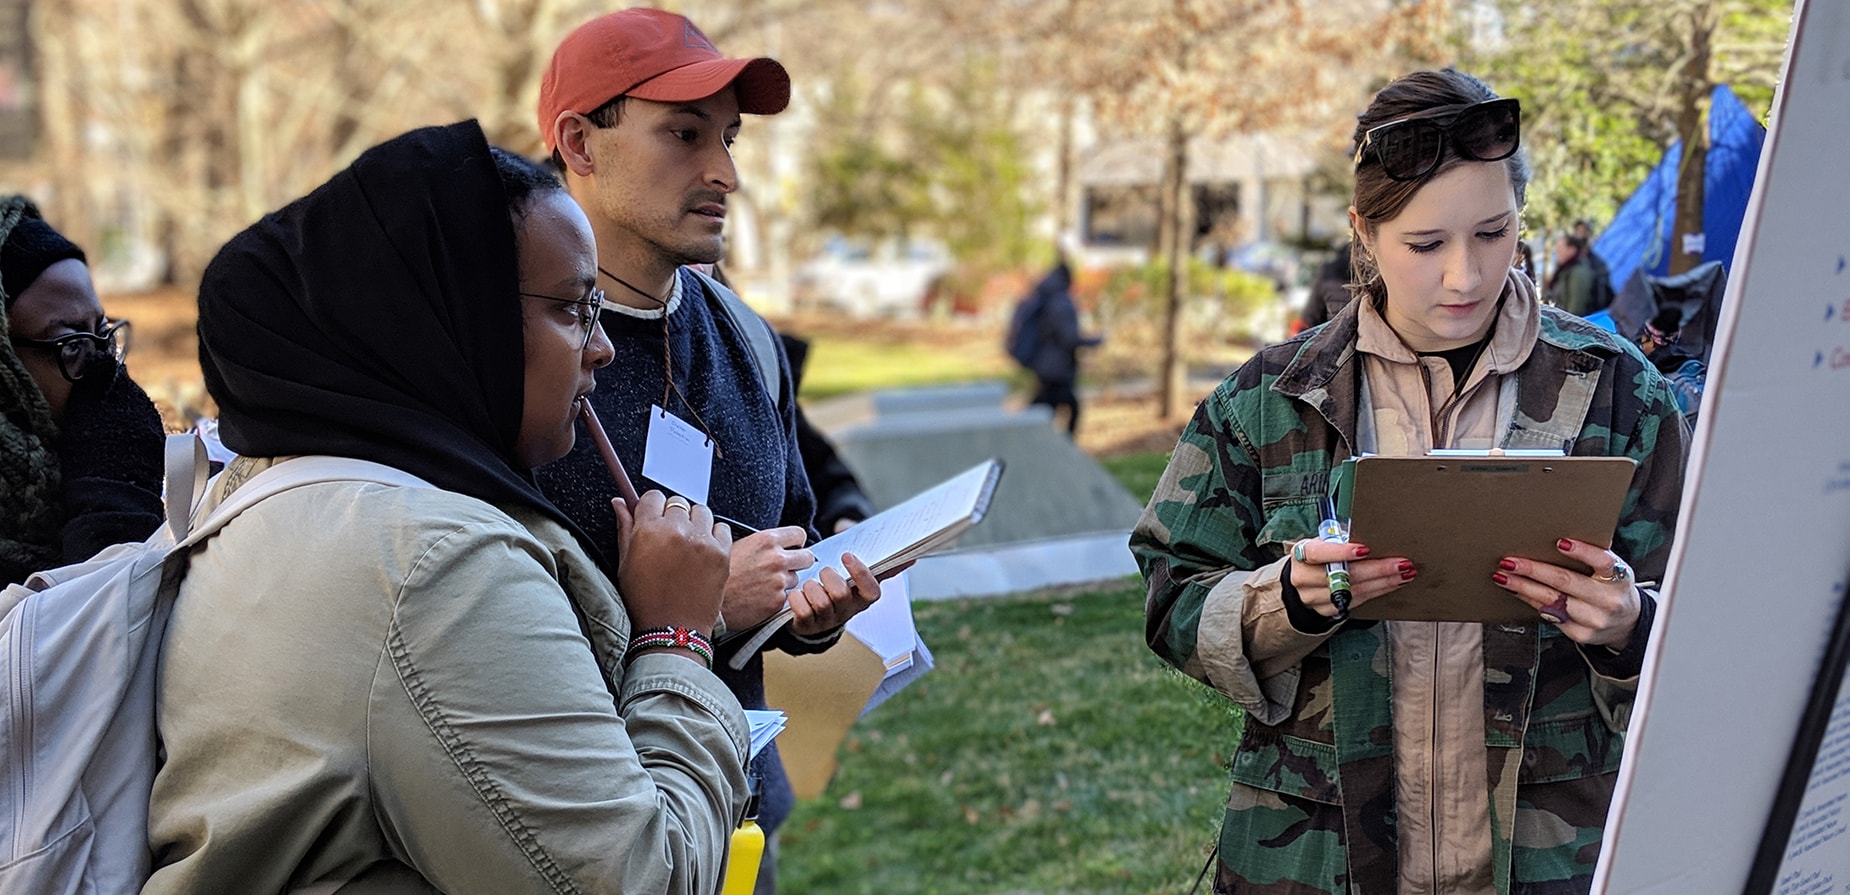 Emergency Response and Recovery Branch staff working through the Refugee Simulation exercise with MPH students during the Health in Complex Humanitarian Emergencies course at Emory University’s Rollins School of Public Health (January, 2020). Photo: Leah Dick